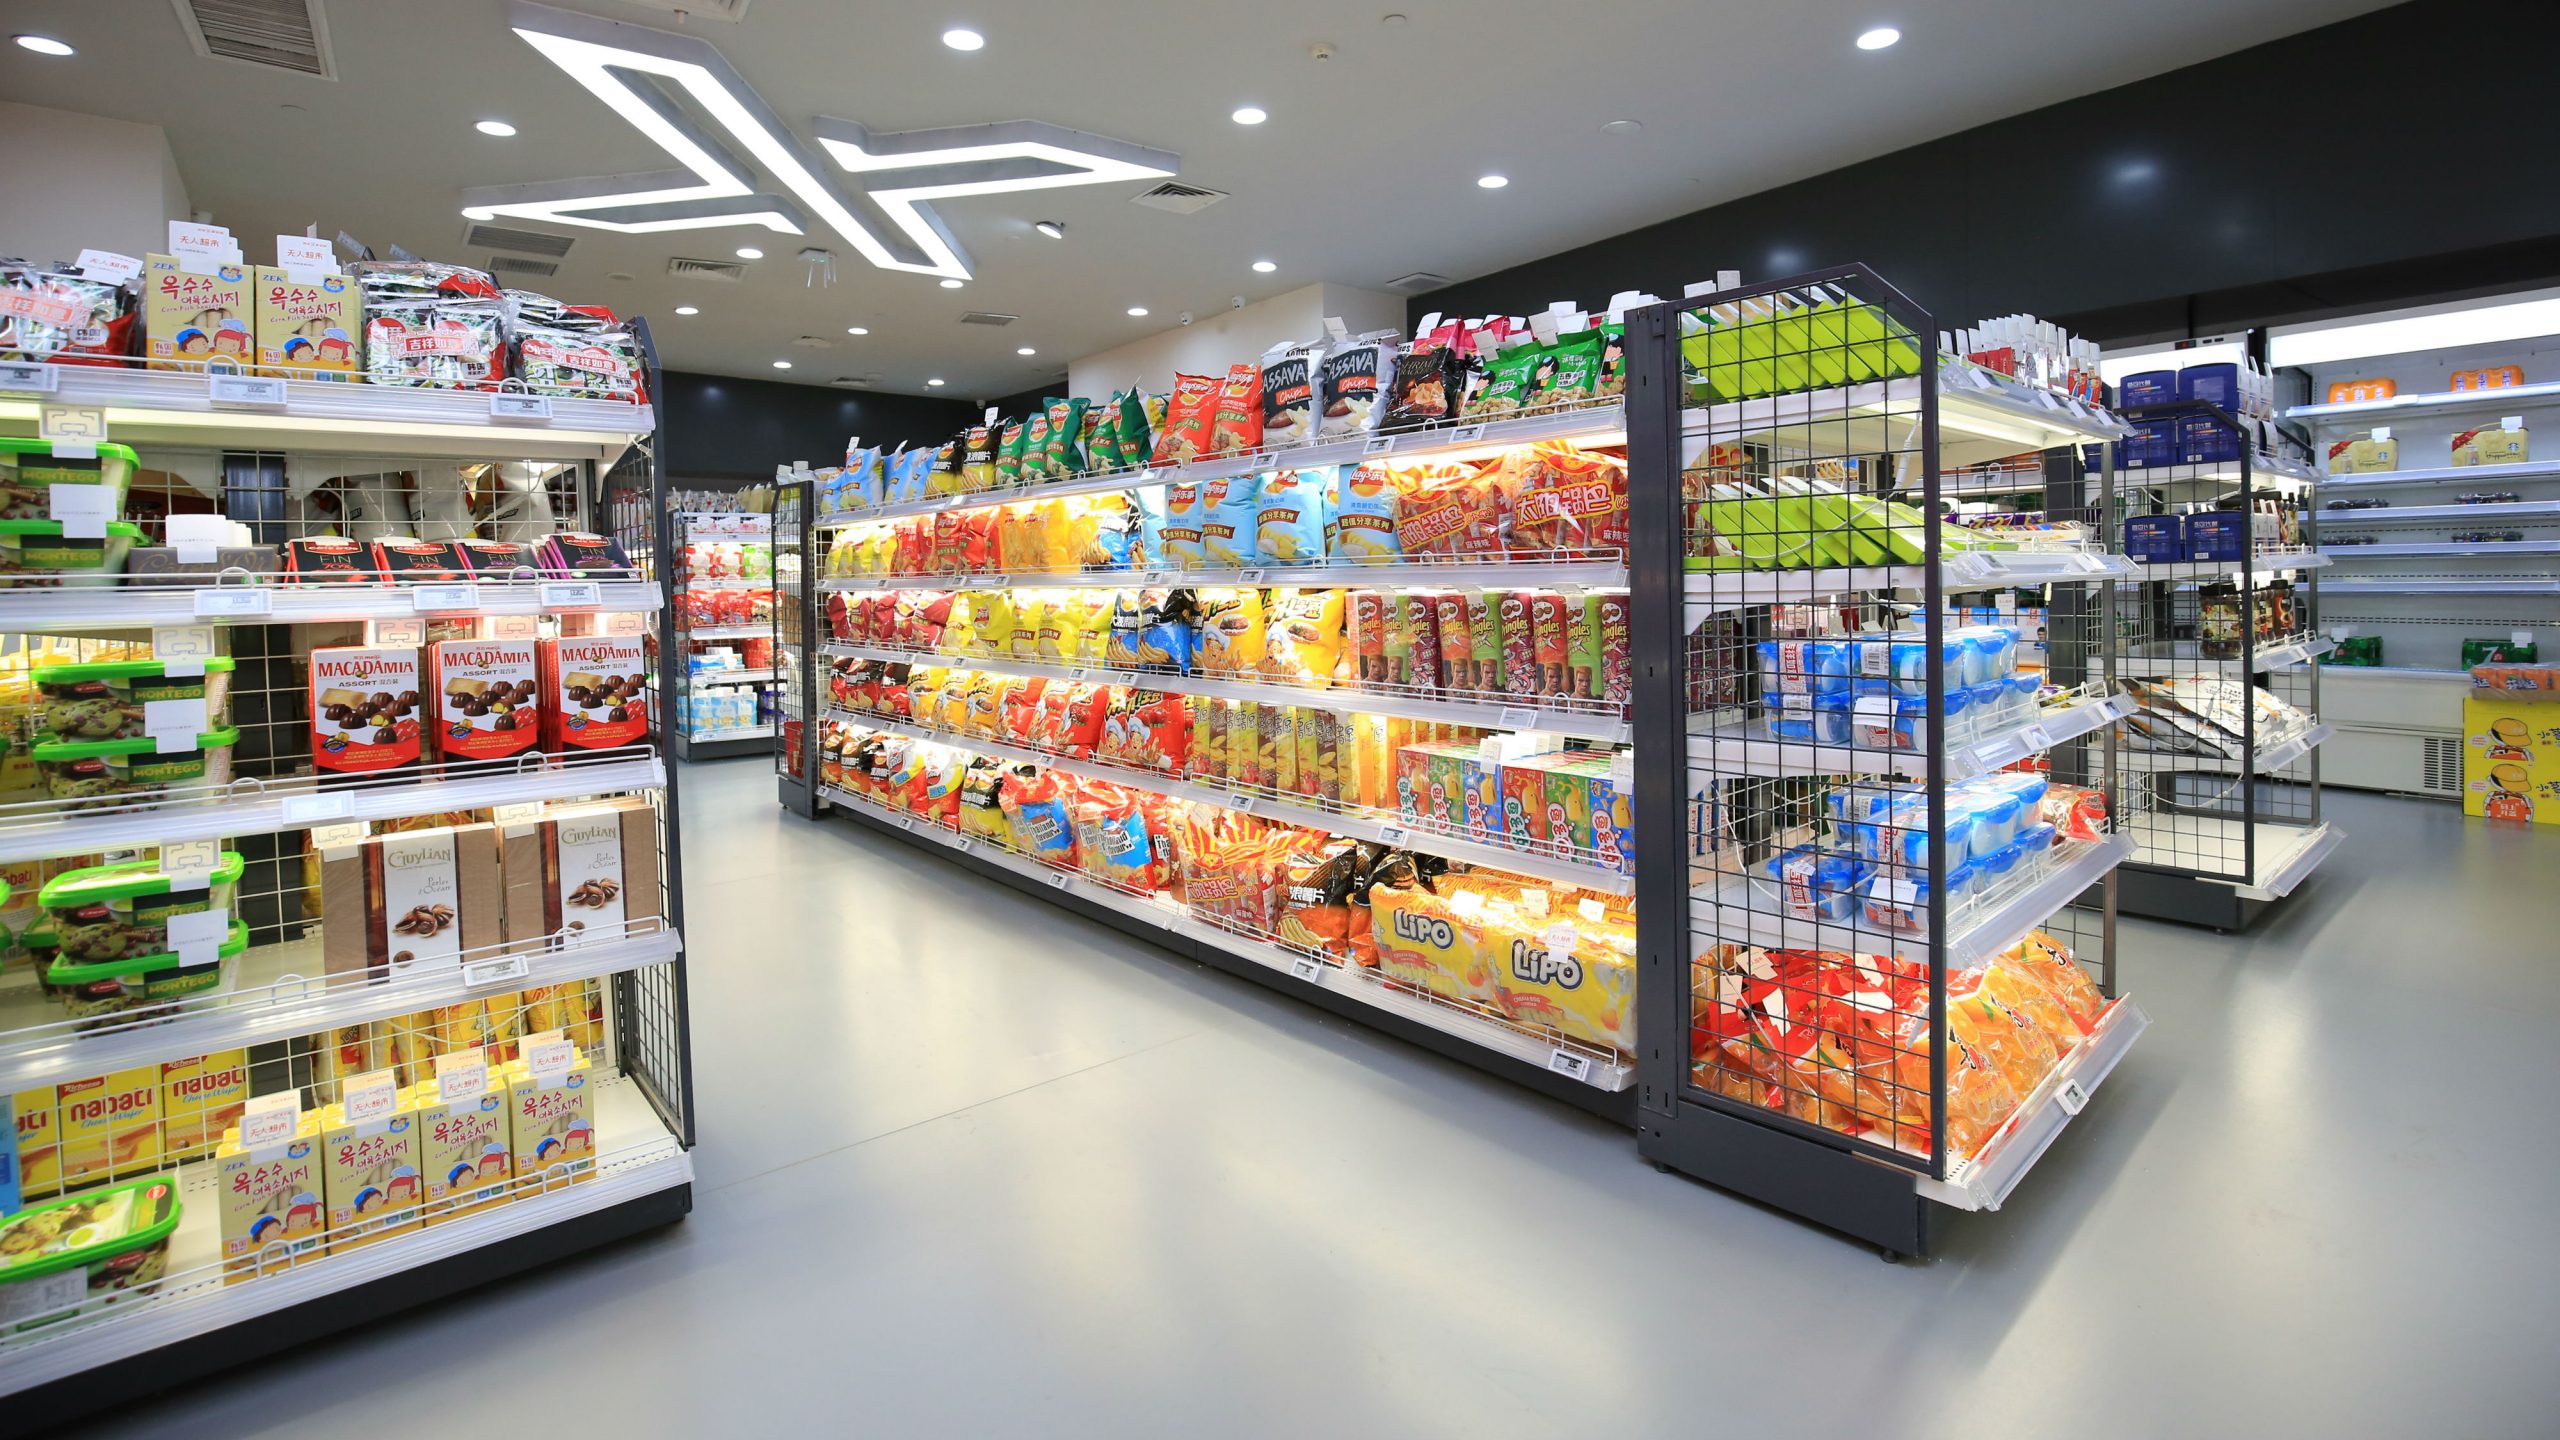 How a Professional Food Display Improves Your Supermarket